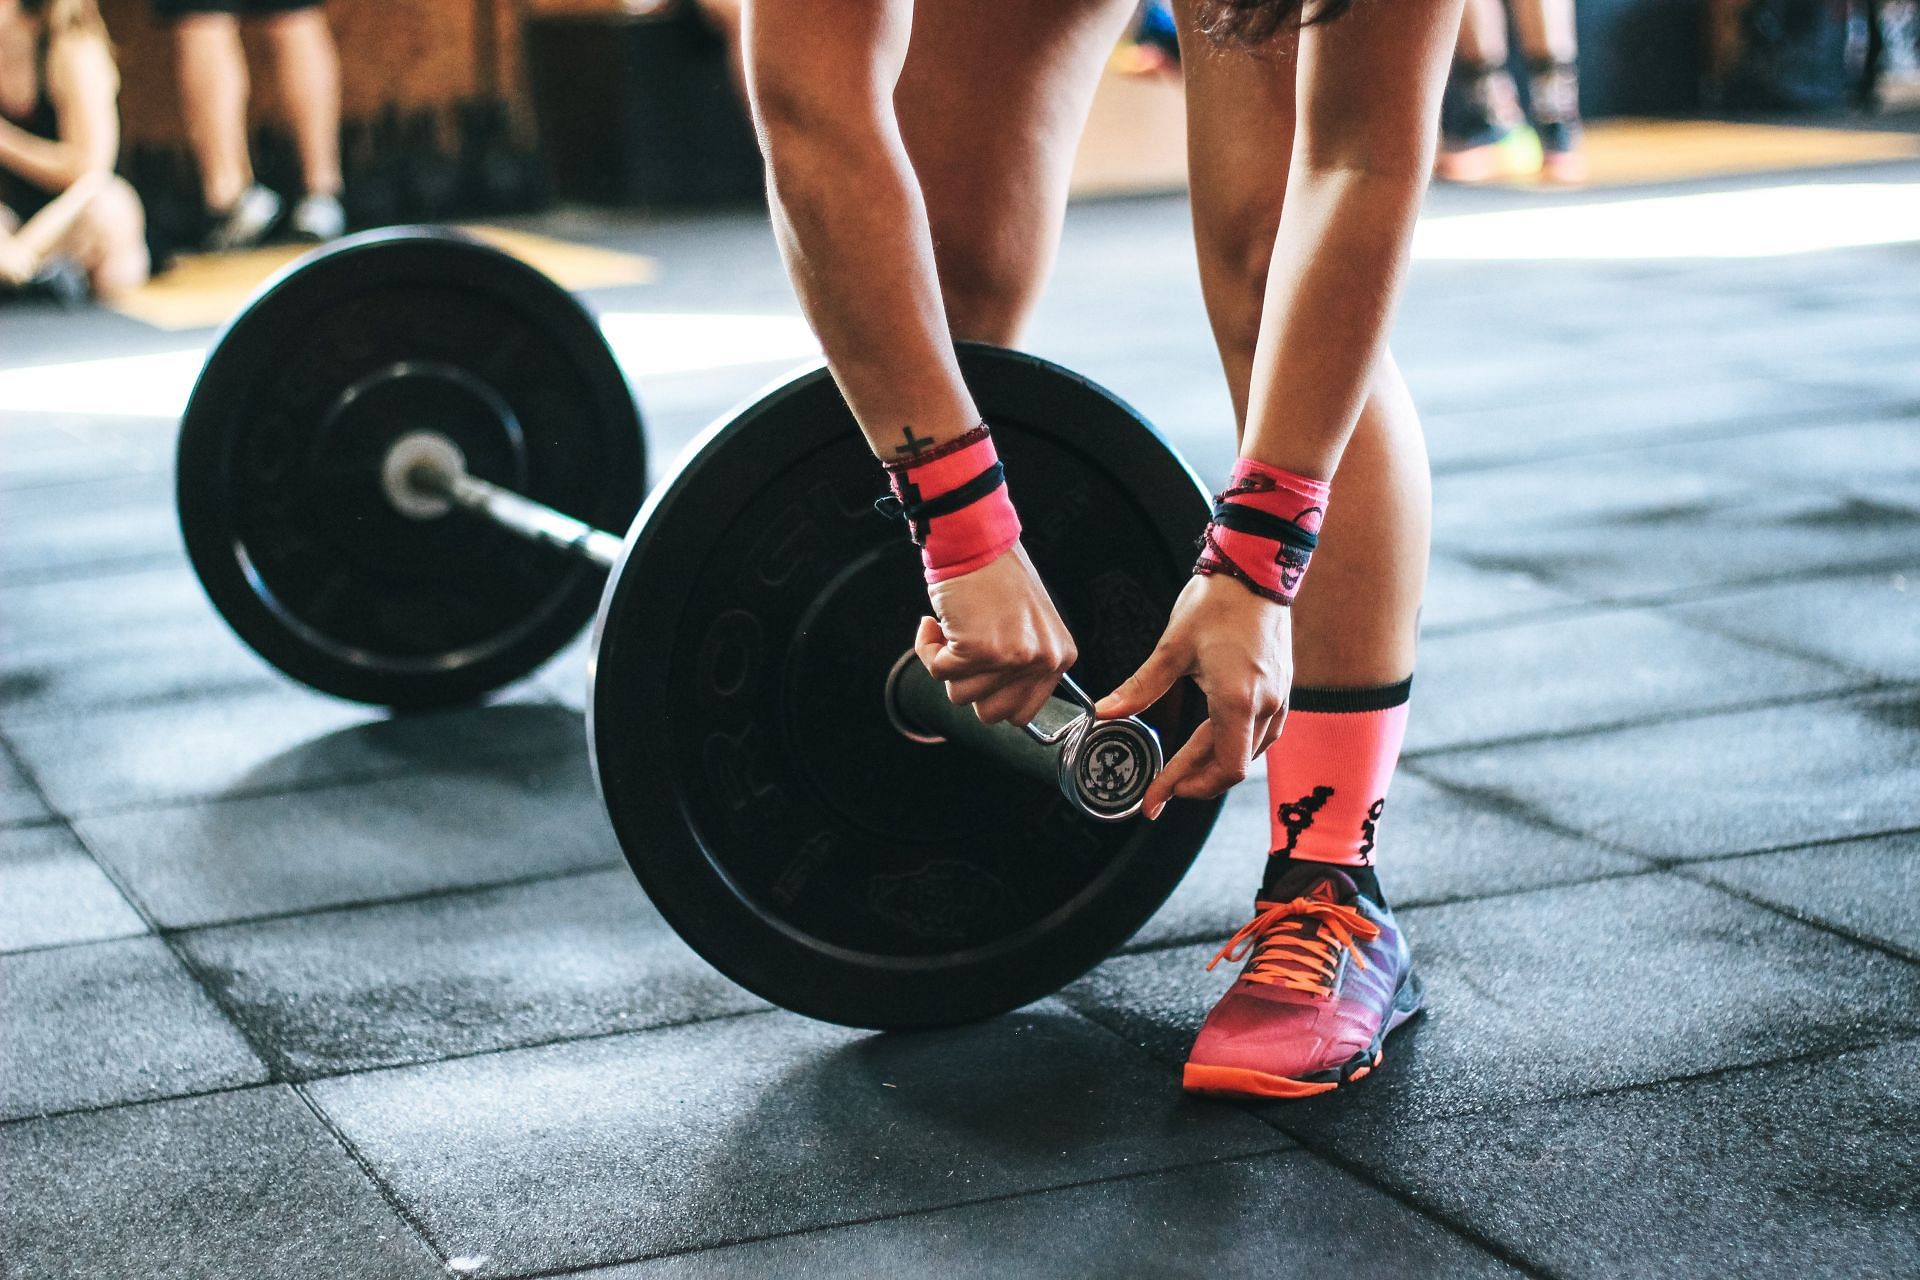 Importance of correctly deadlifting (image sourced via Pexels / Photo by victor)